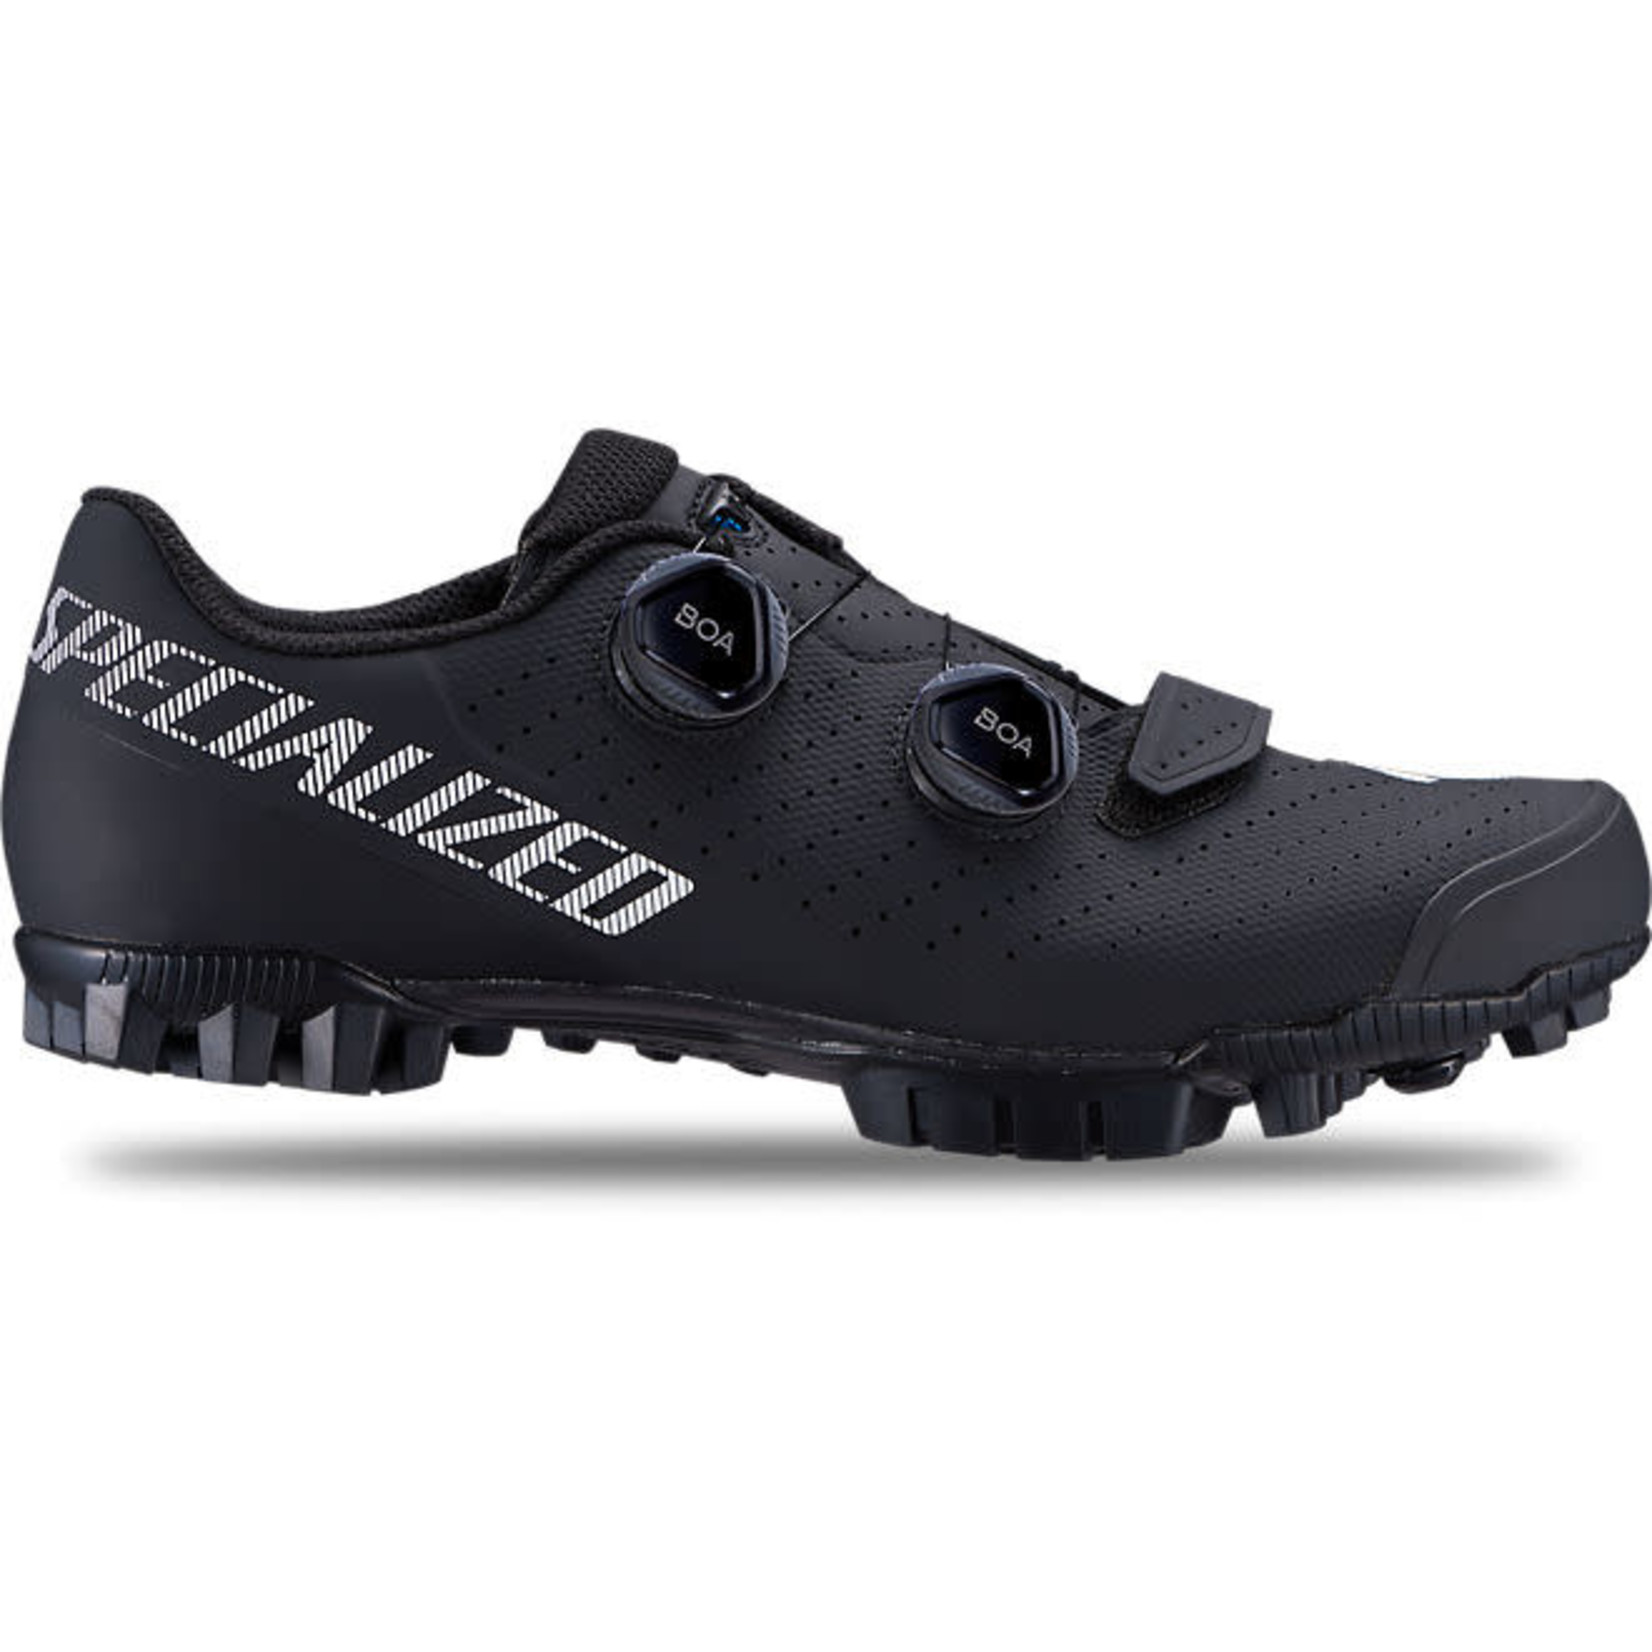 SPECIALIZED Recon 3.0 Mountain Bike Shoes